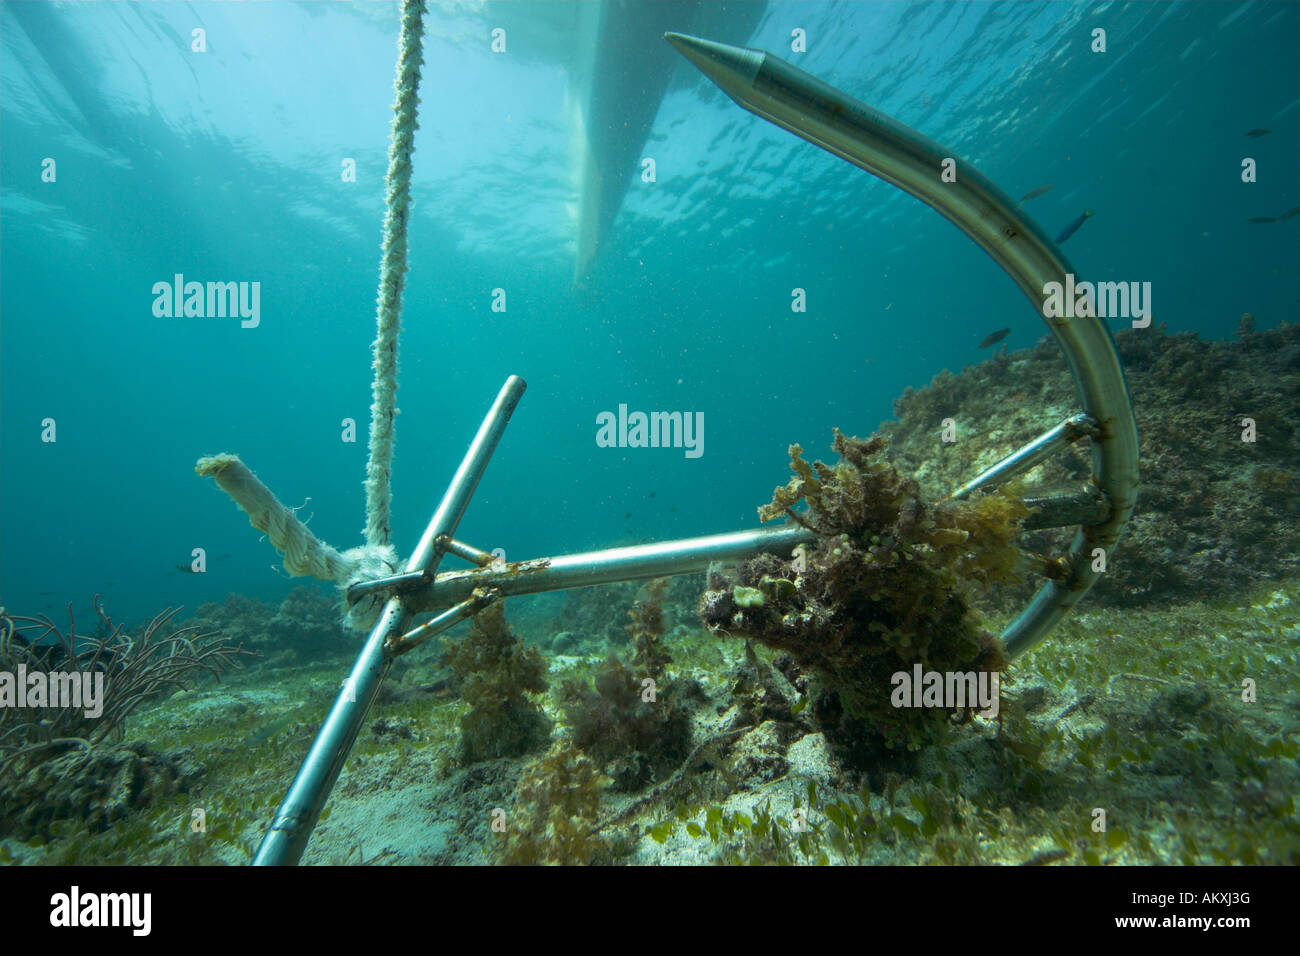 Anchor in a coral reef, Asia, Philippines. Stock Photo